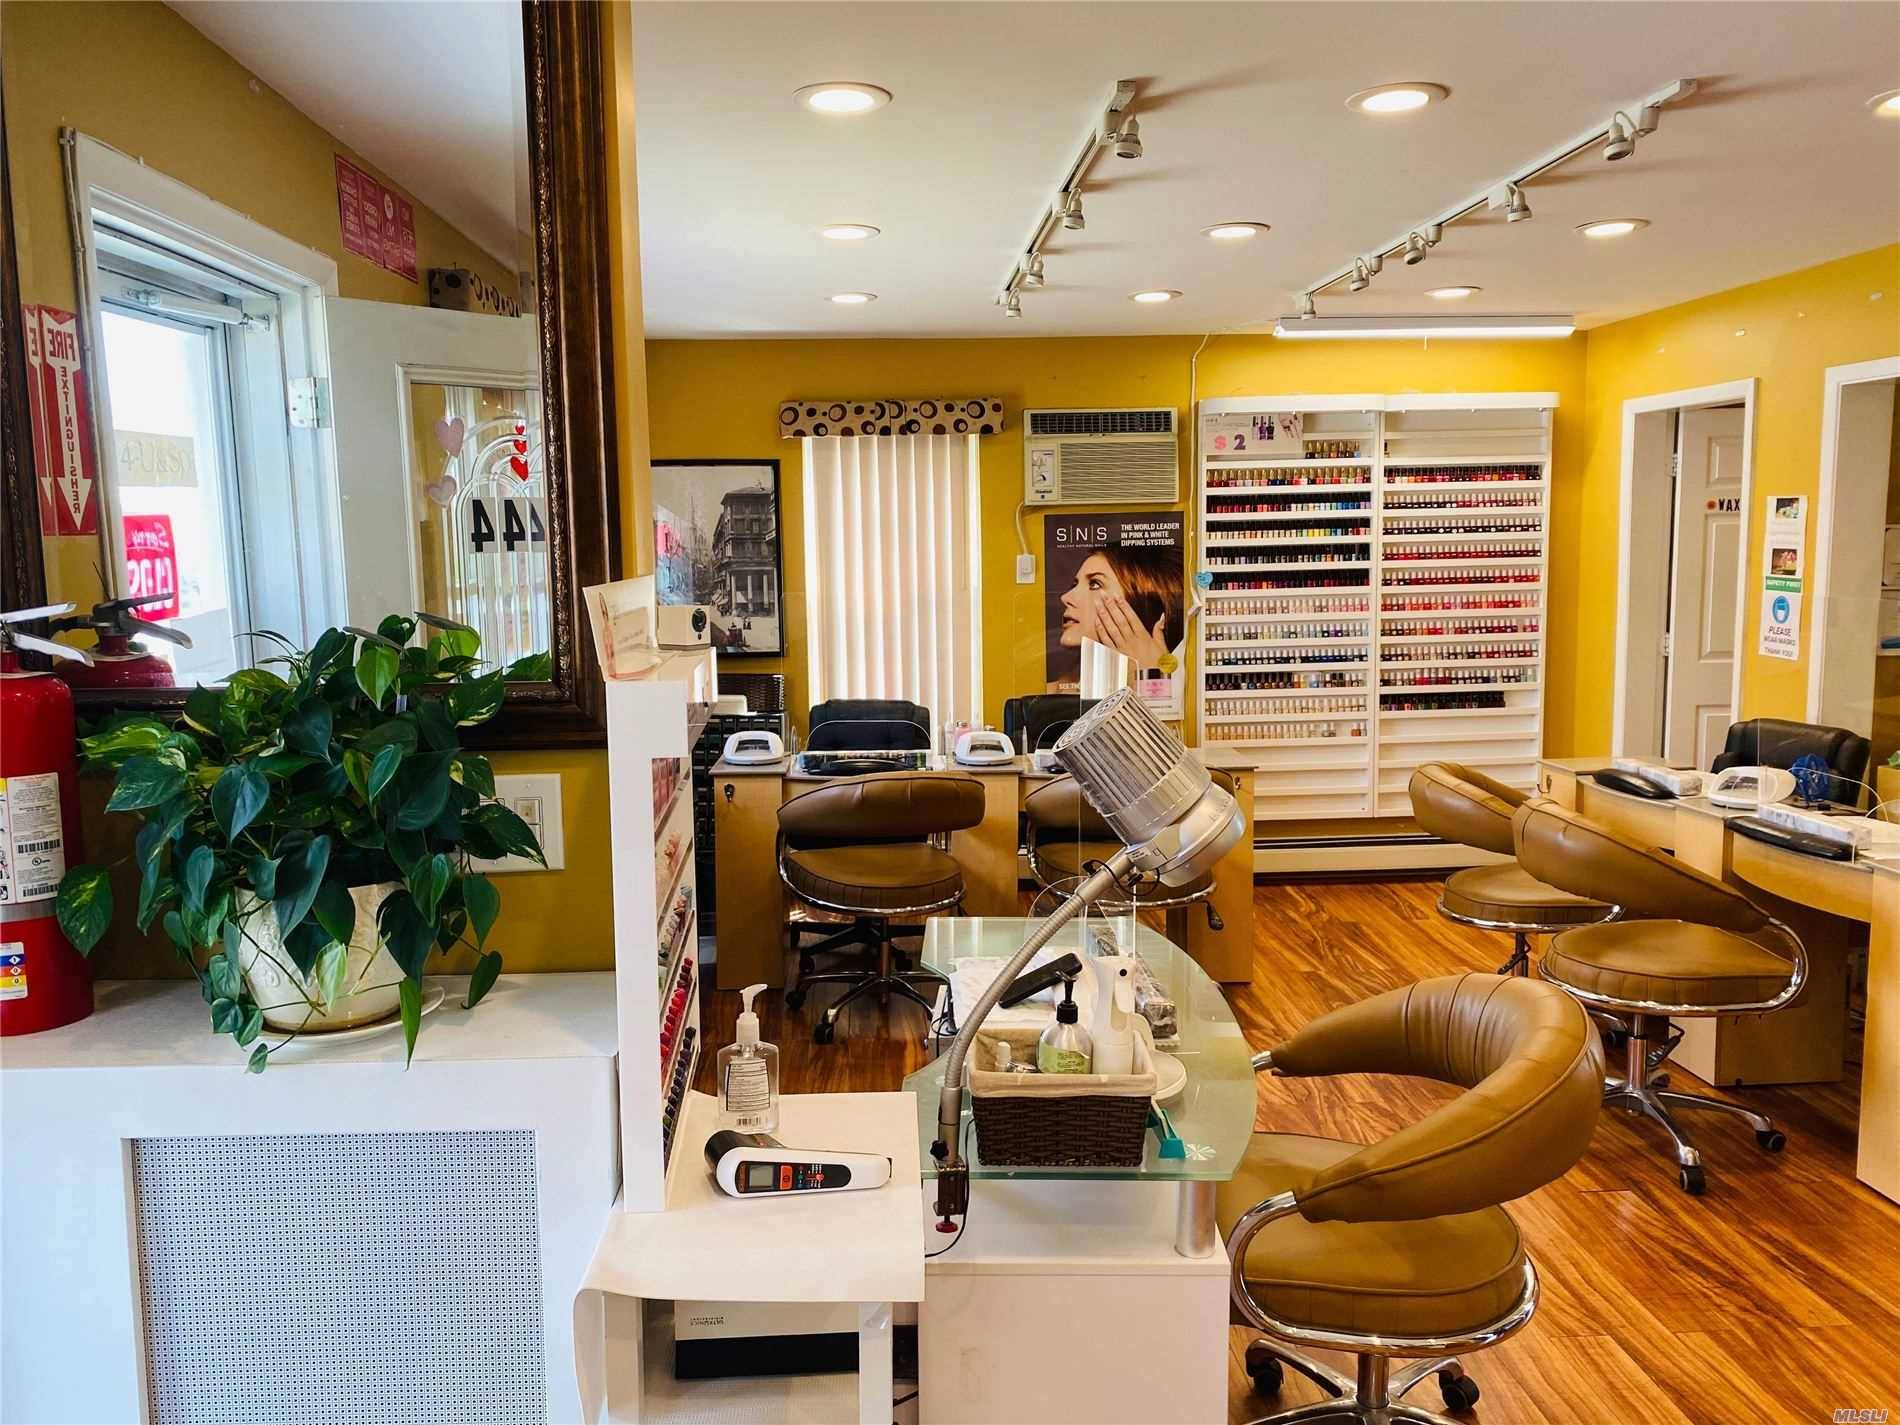 Business sale only. This business is fully equipped for pedicure, manicure, waxing.